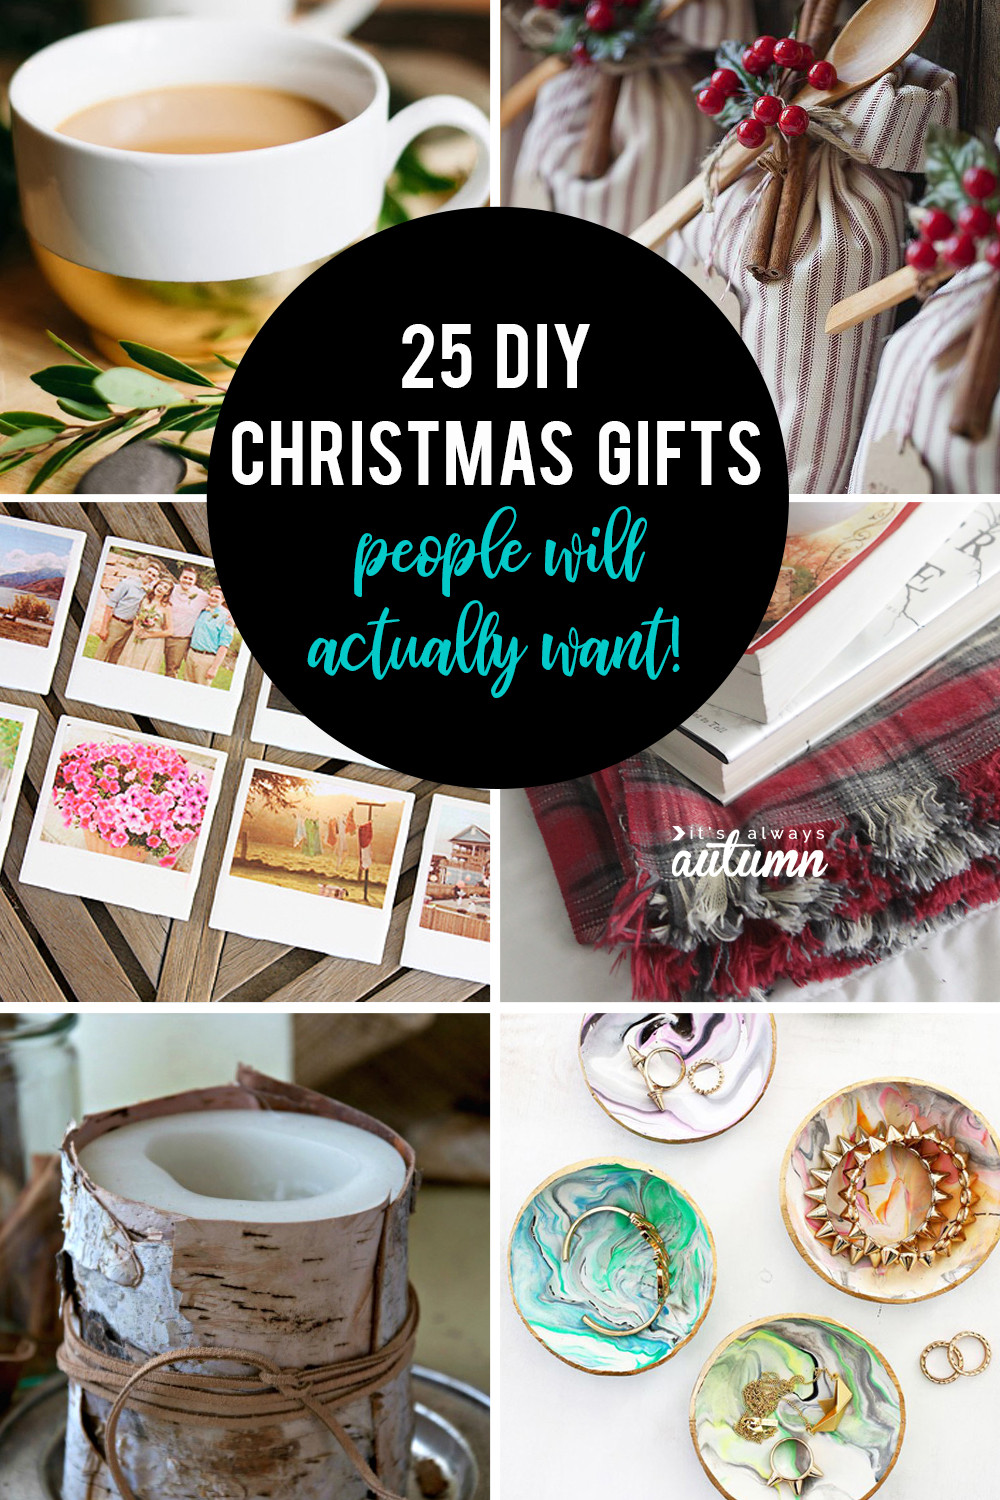 Christmas Gifts Ideas DIY
 25 amazing DIY ts people will actually want It s